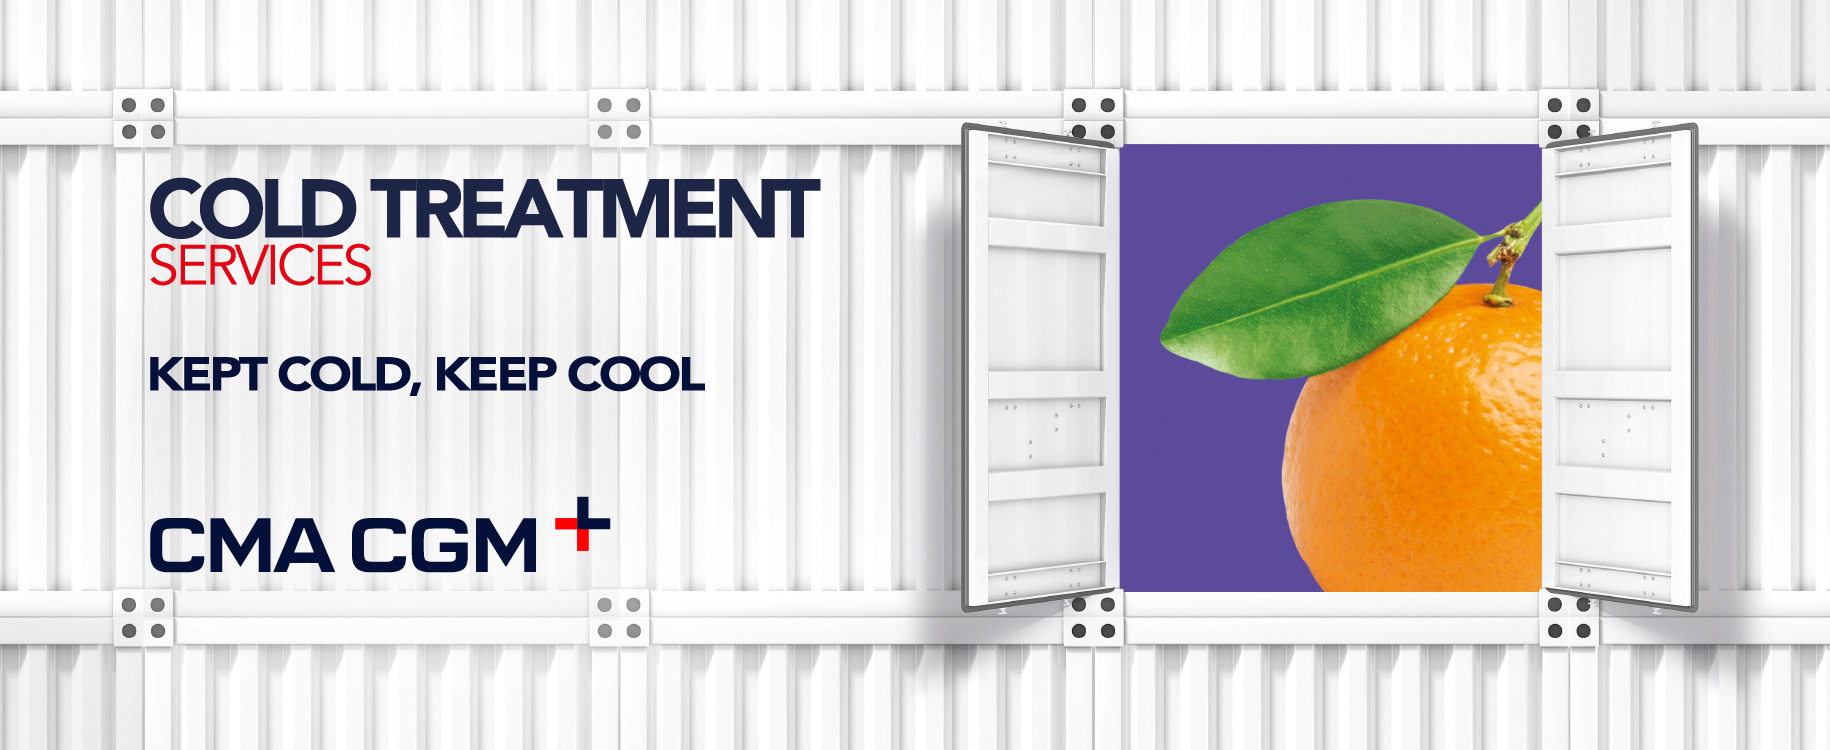 COLD TREATMENT services banner image